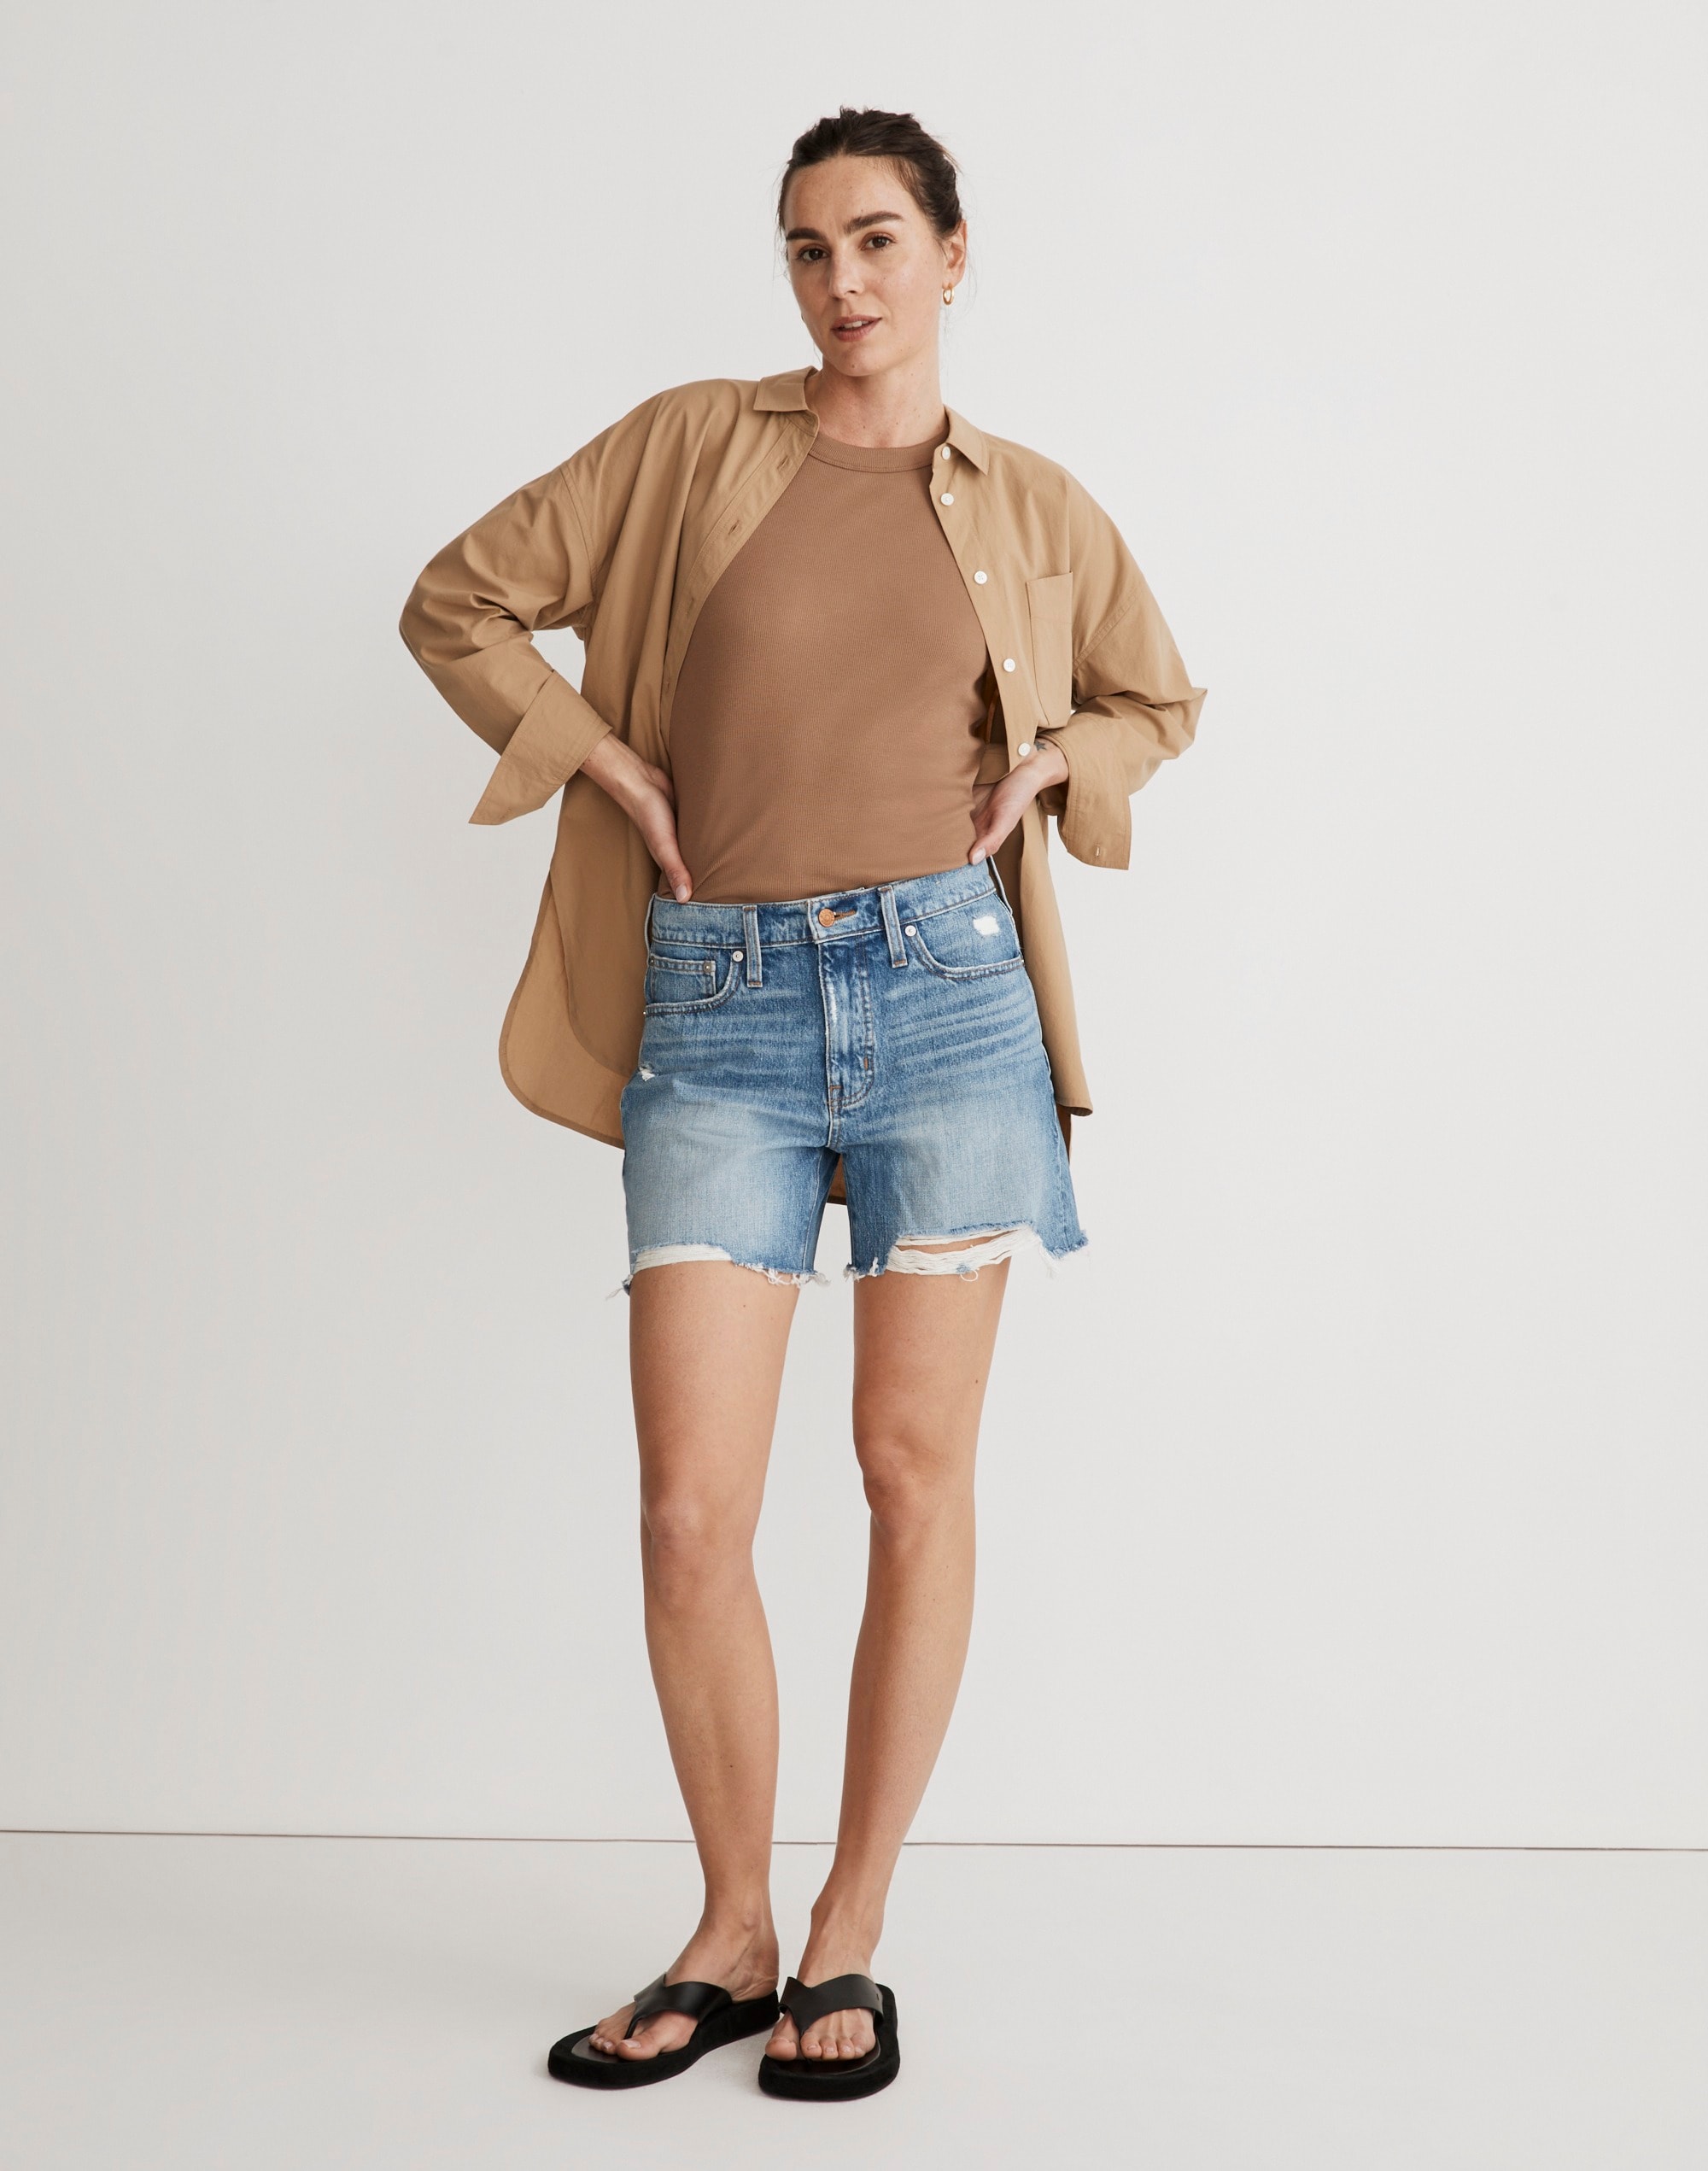 Relaxed Mid-Length Denim Shorts in Brockport Wash